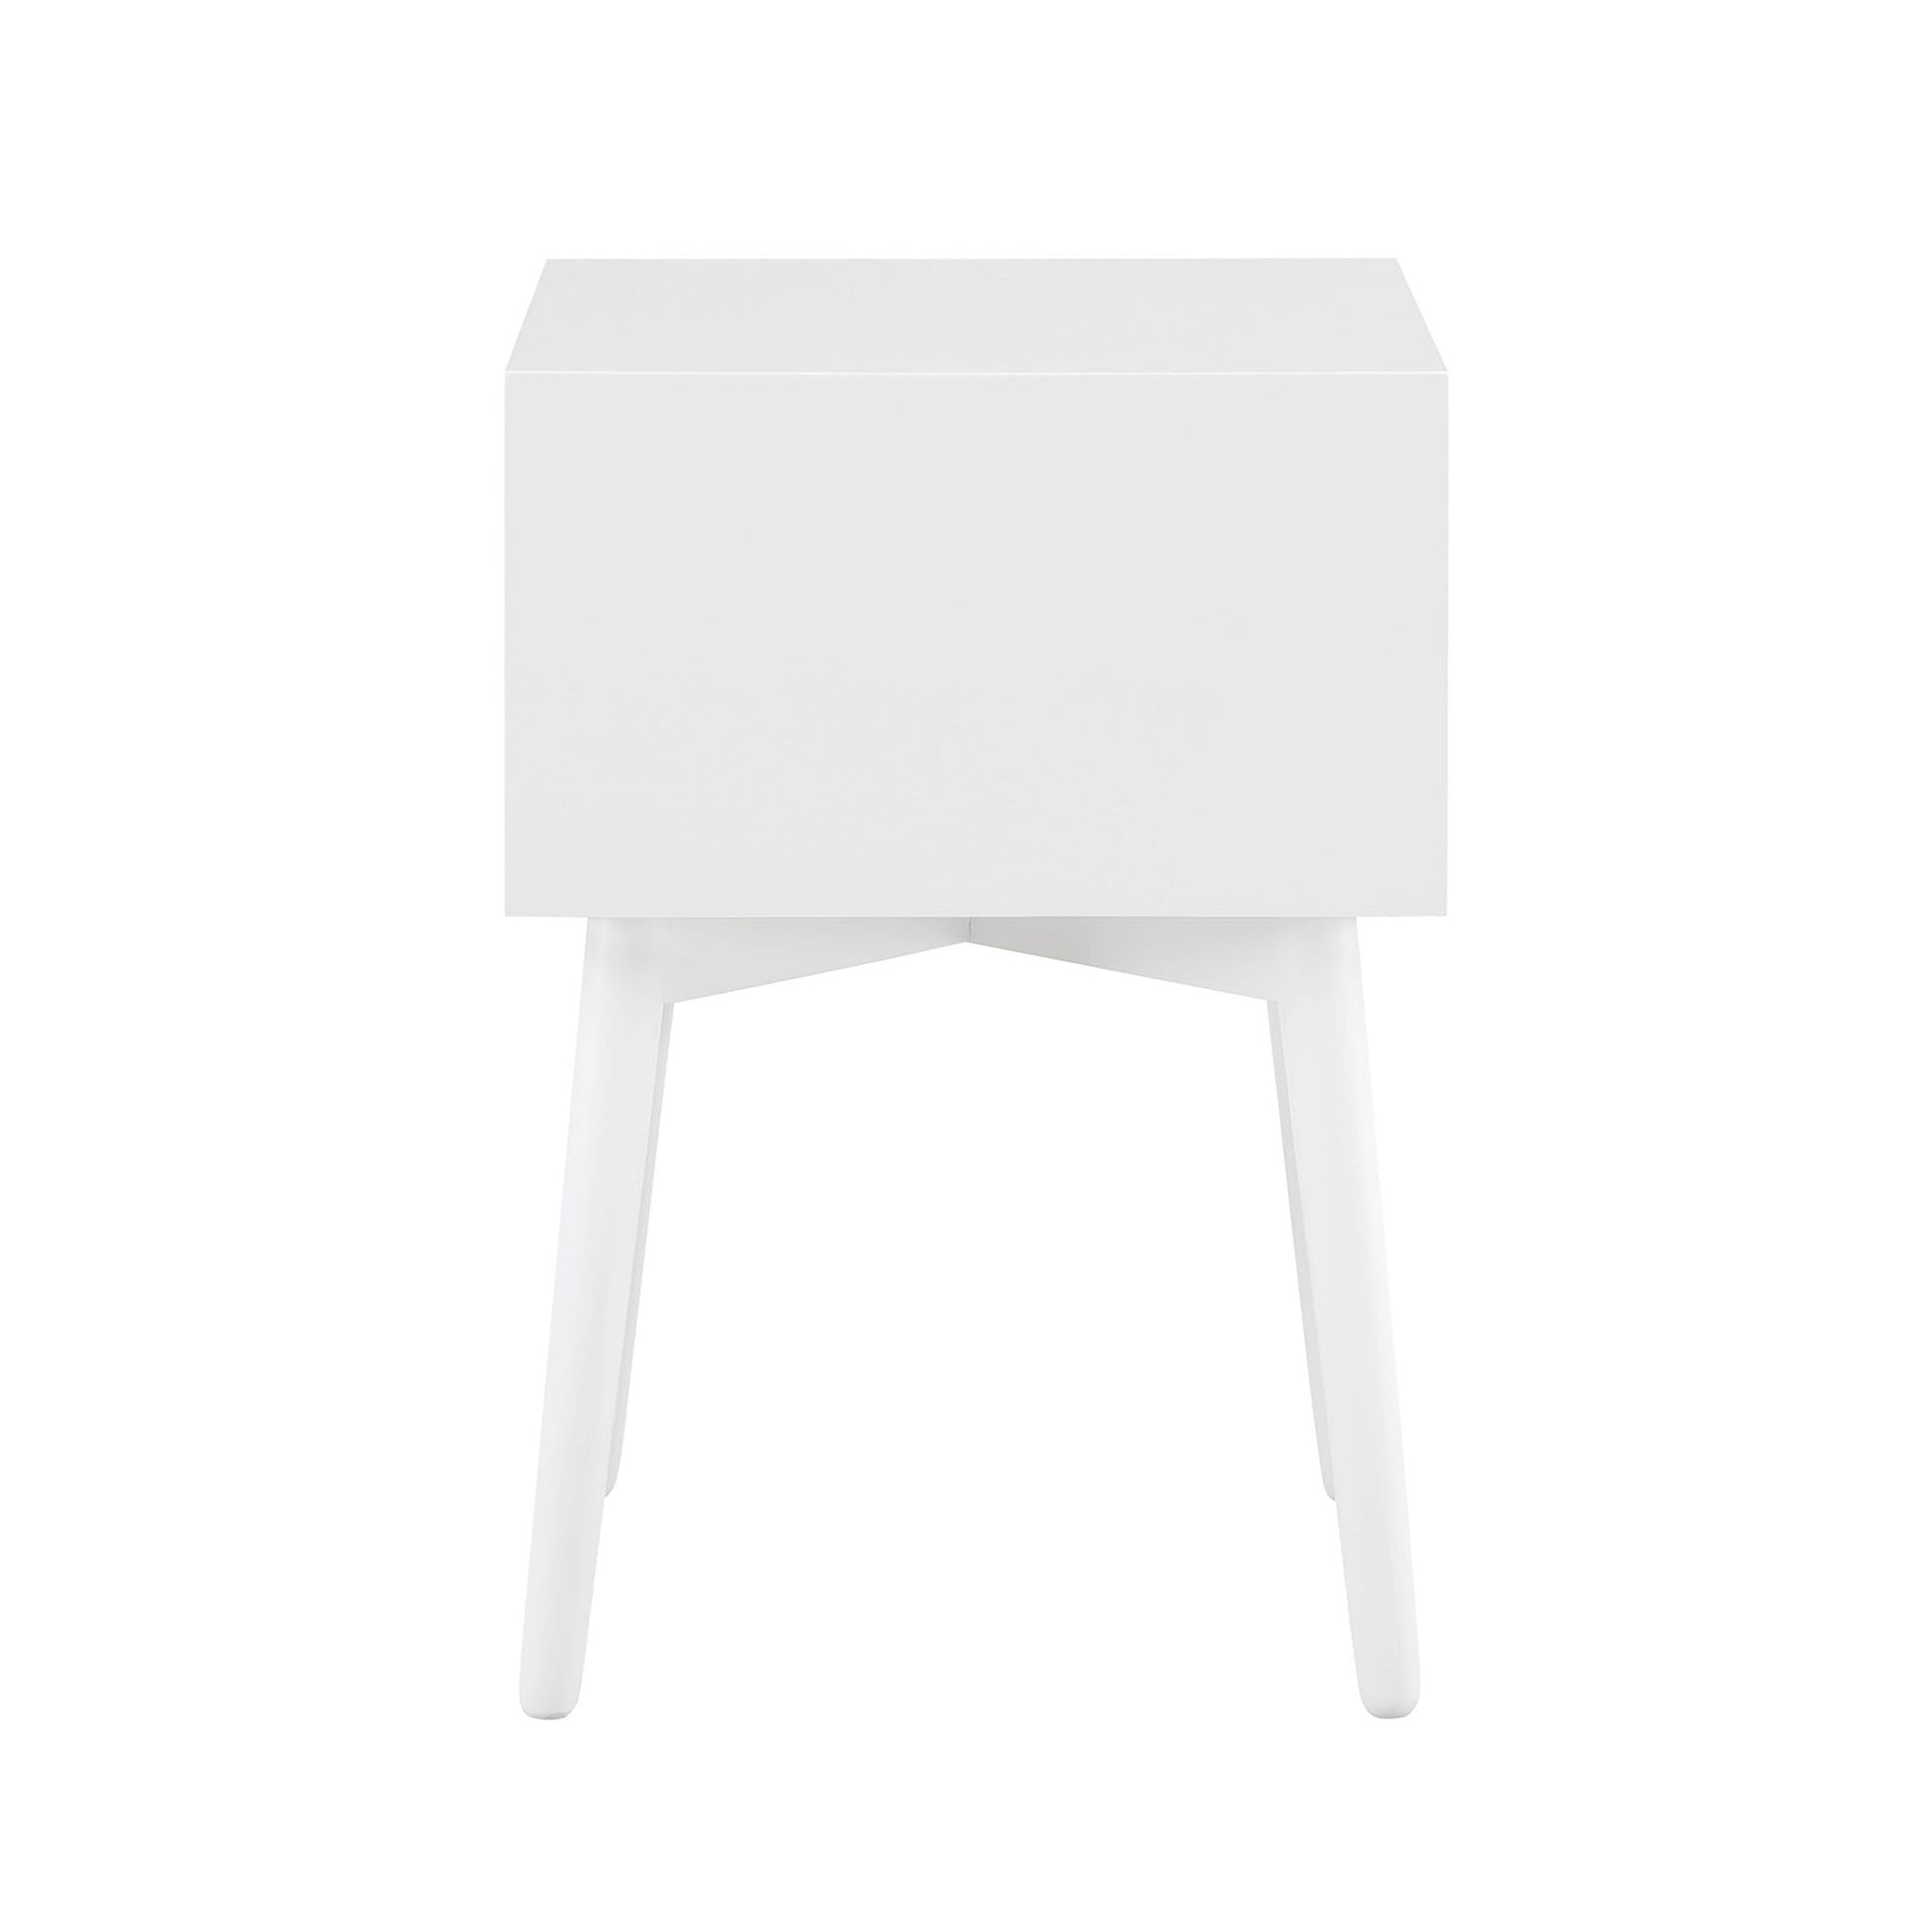 Front-facing side view of a modern white two-drawer compact nightstand with splayed legs on a white background